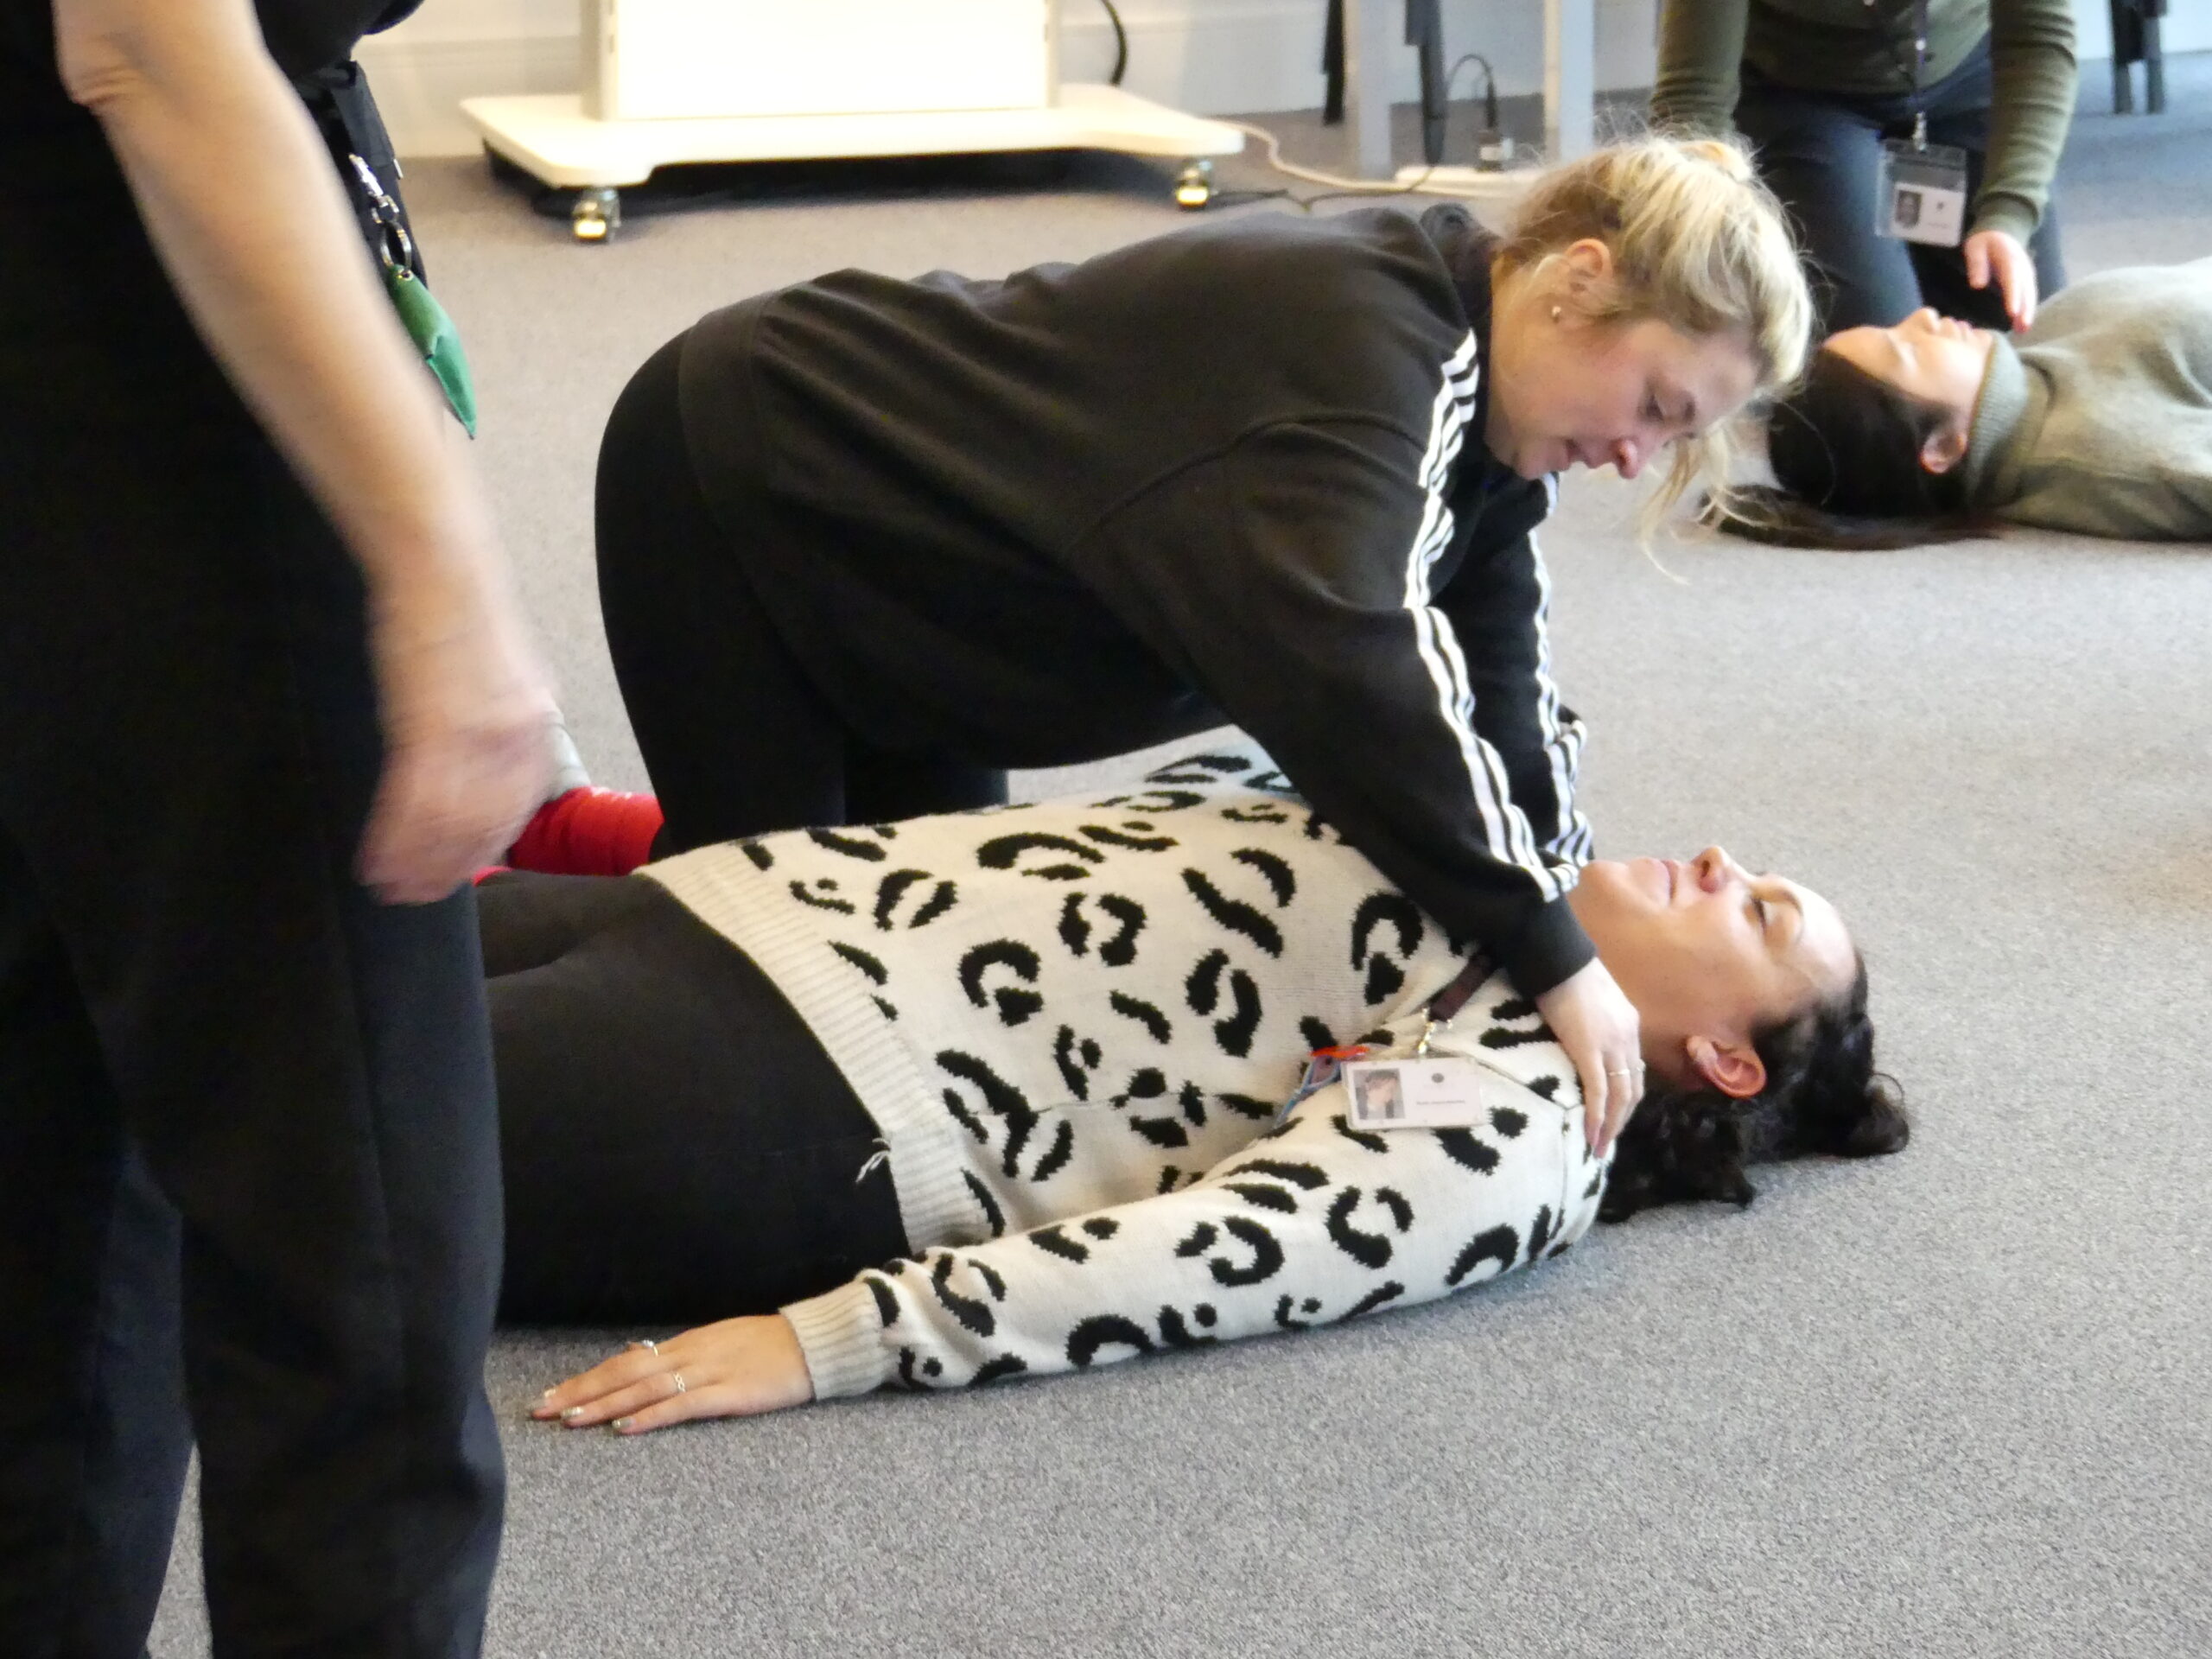 Learner practicing checking response on a first aid course